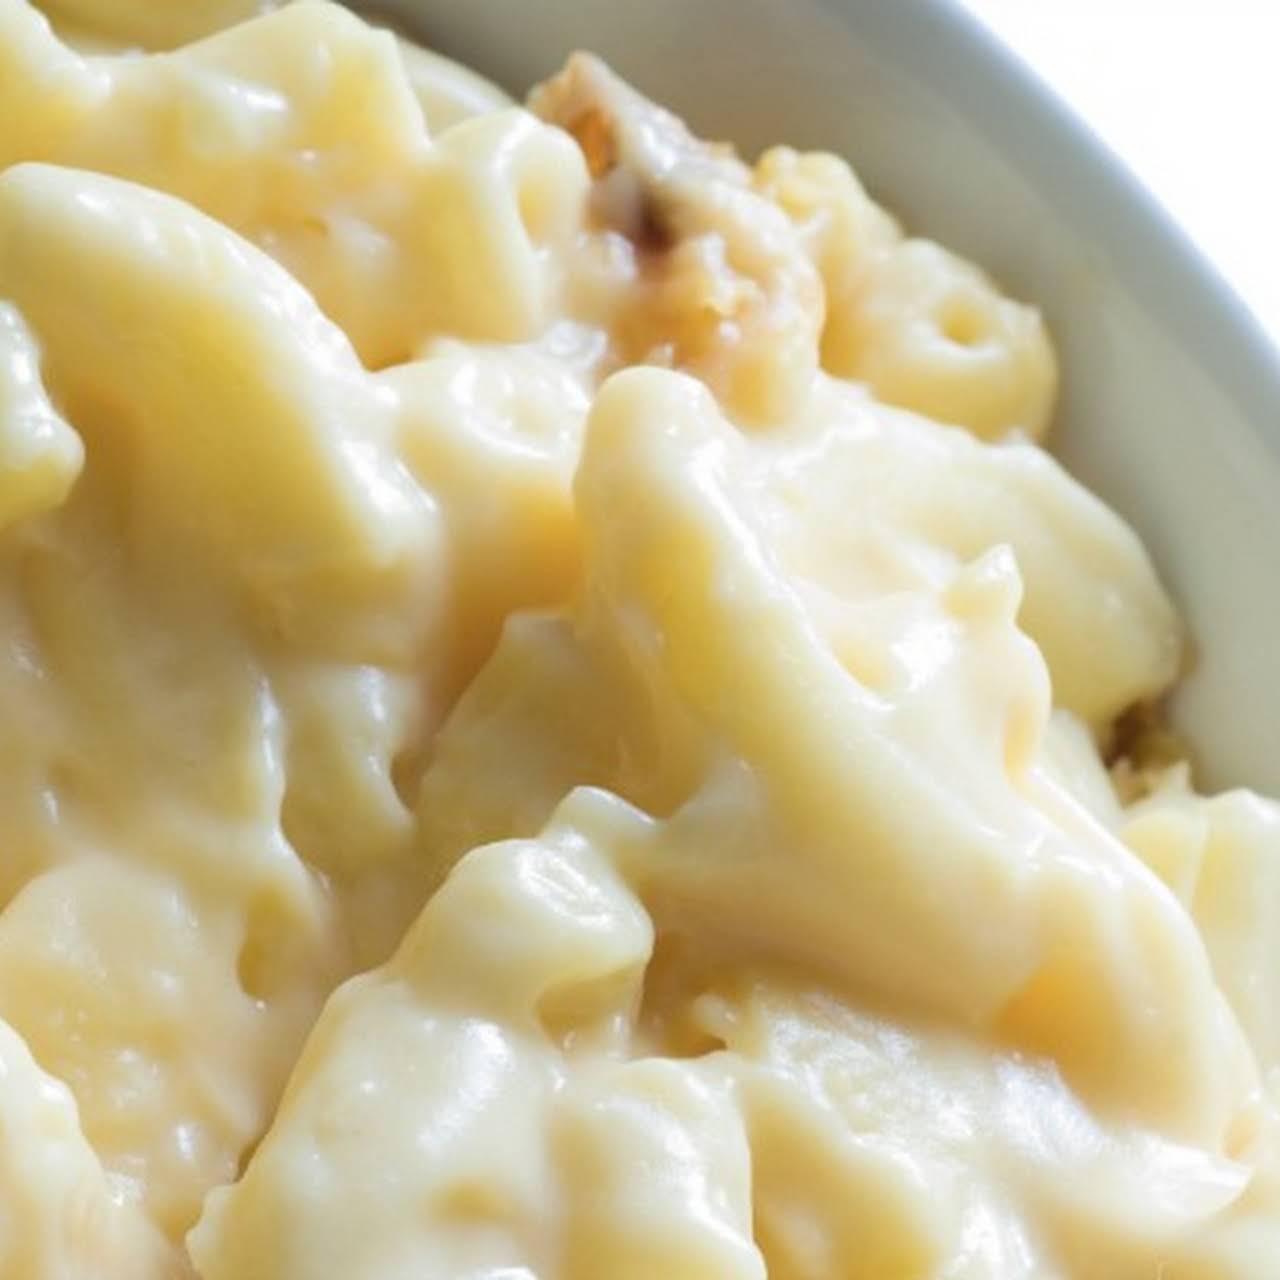 The Creamiest Slow Cooker Mac & Cheese!